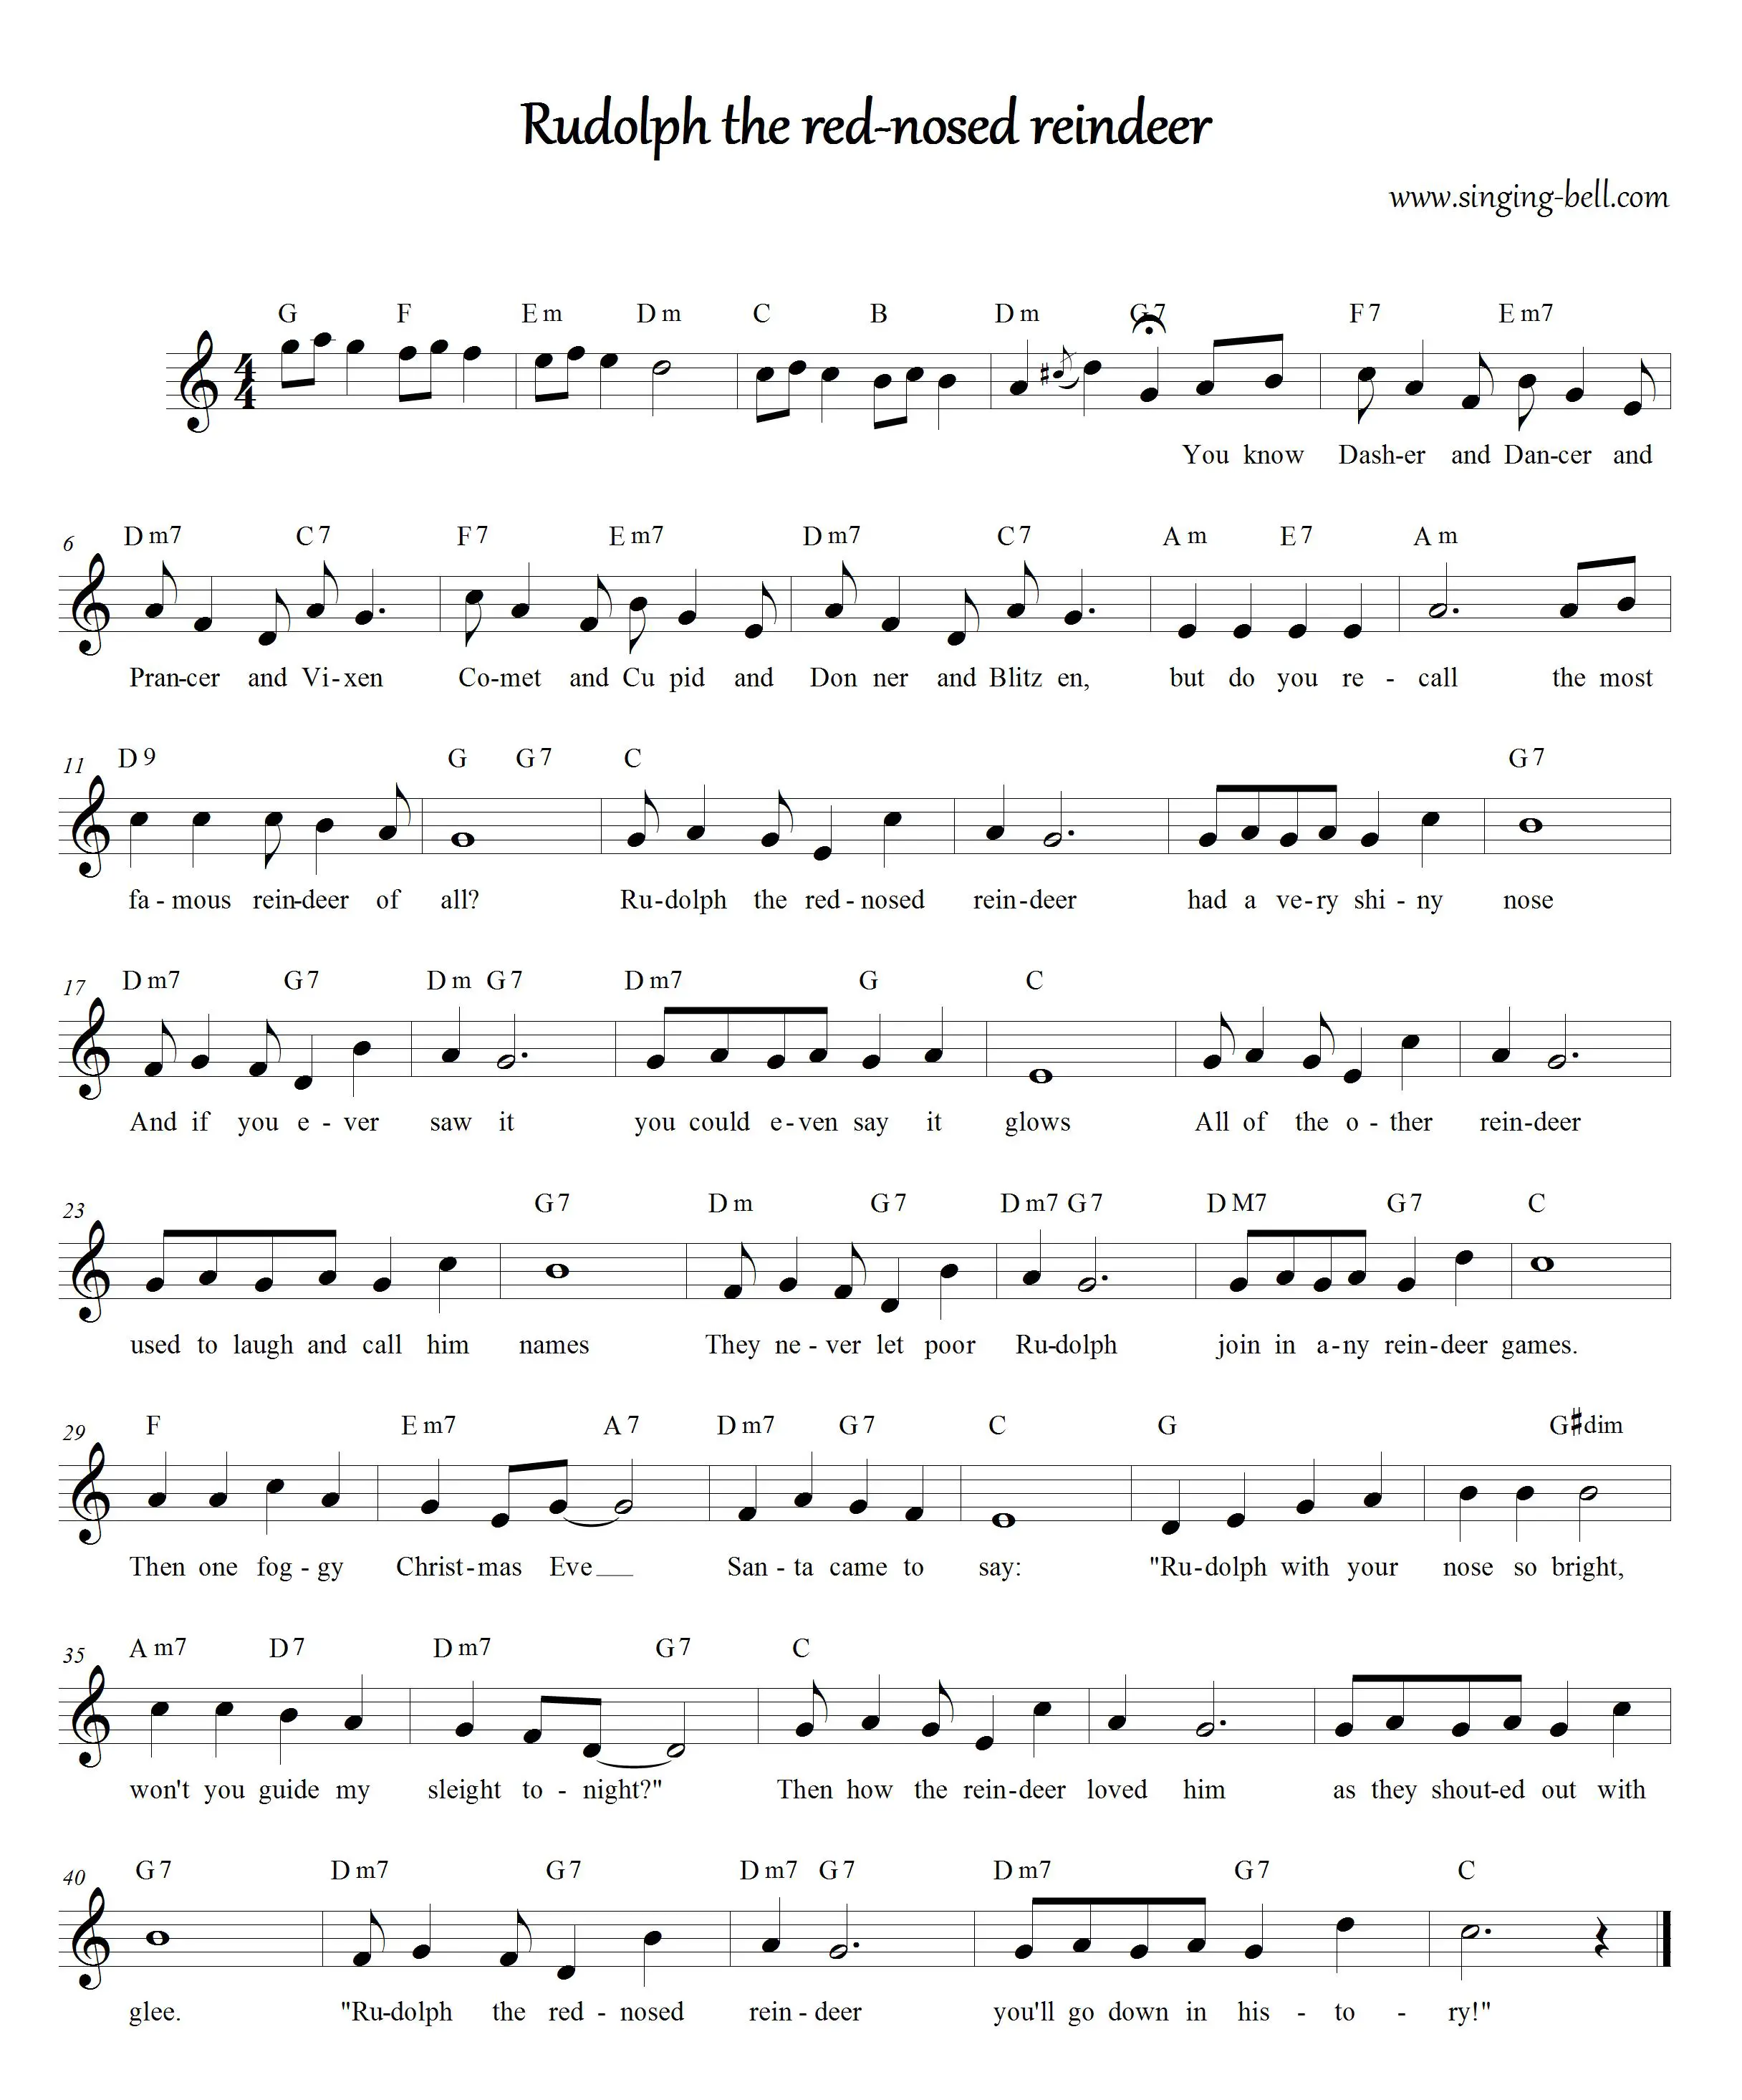 Rudolph, the red-nosed reindeer - Free Christmas sheet music download in C